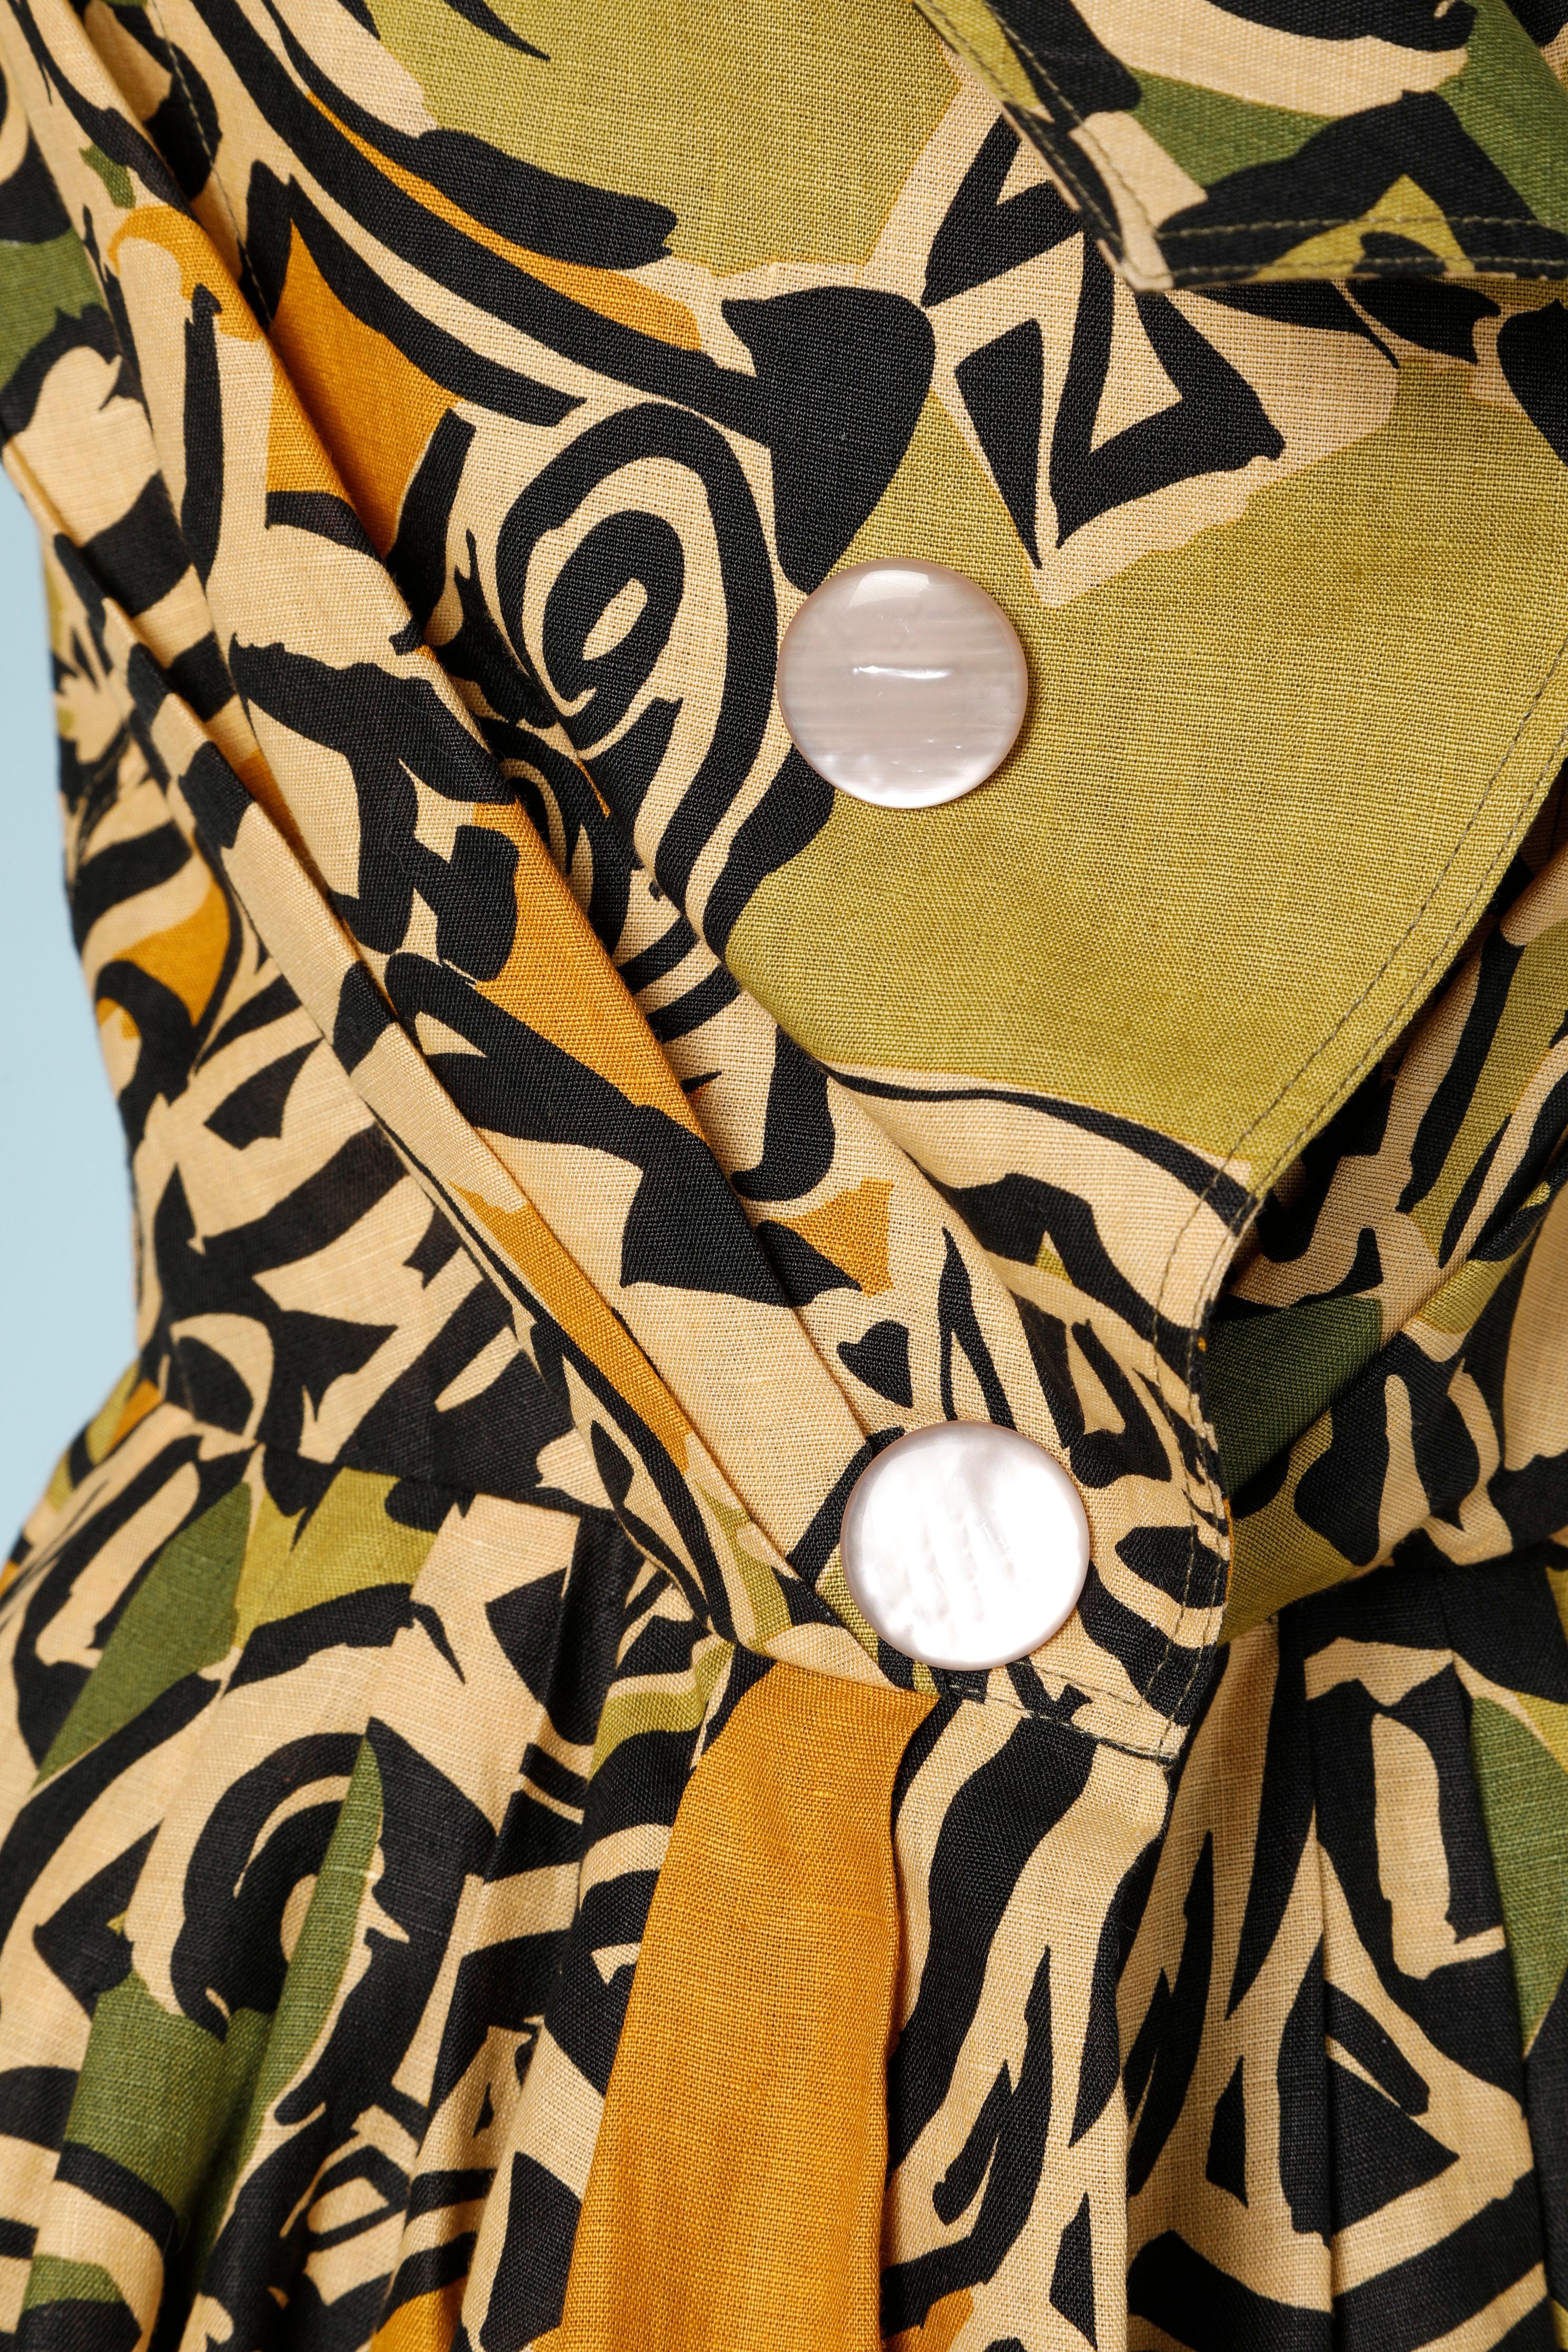 Printed cotton wrap dress in linen, buttoned in the middle front. 